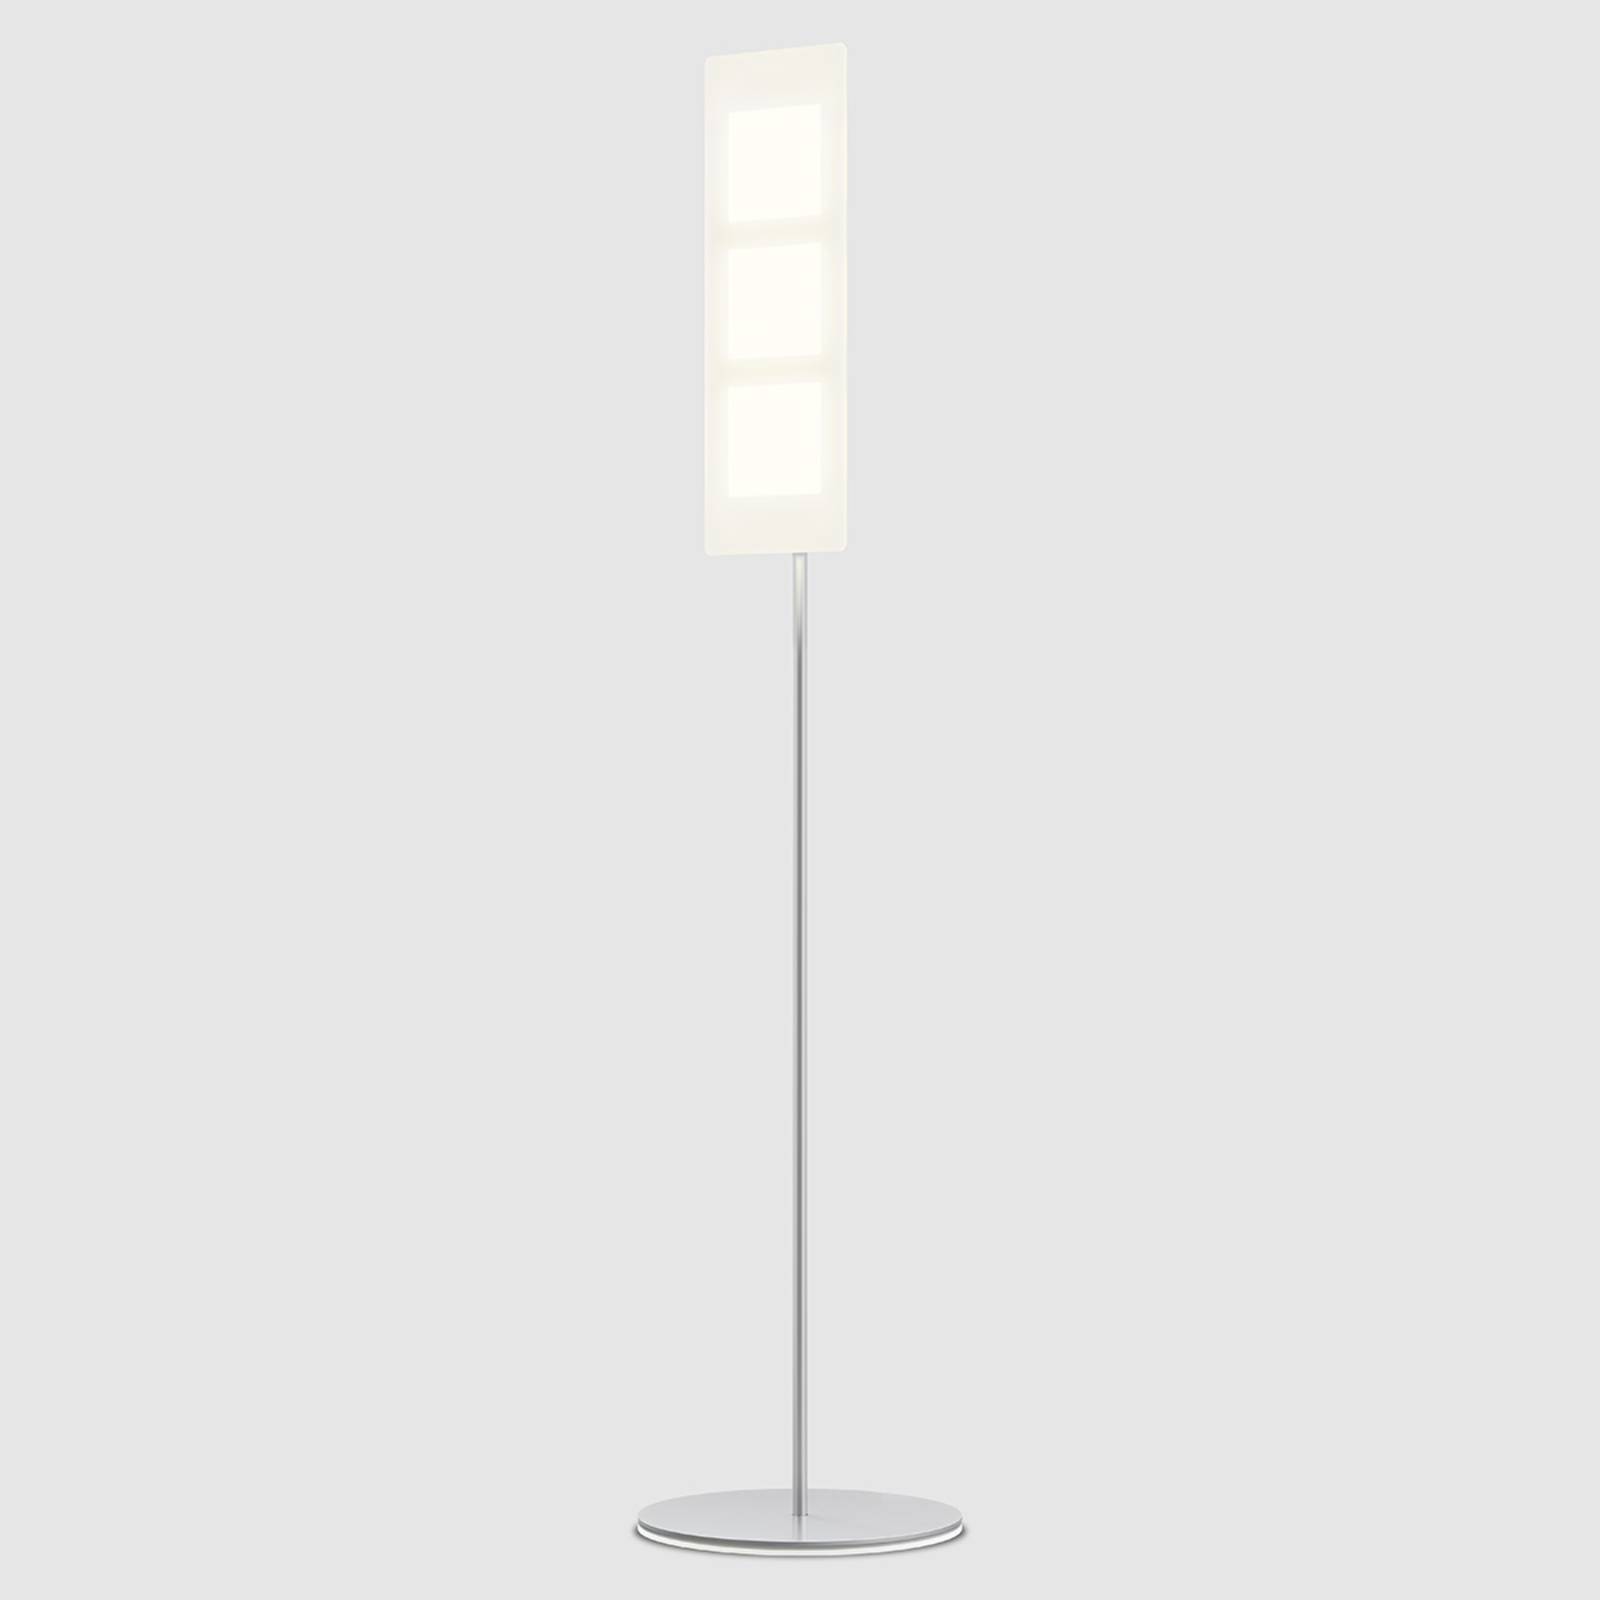 Image of OMLED One f3 - lampadaire OLED en blanc 4260744970120